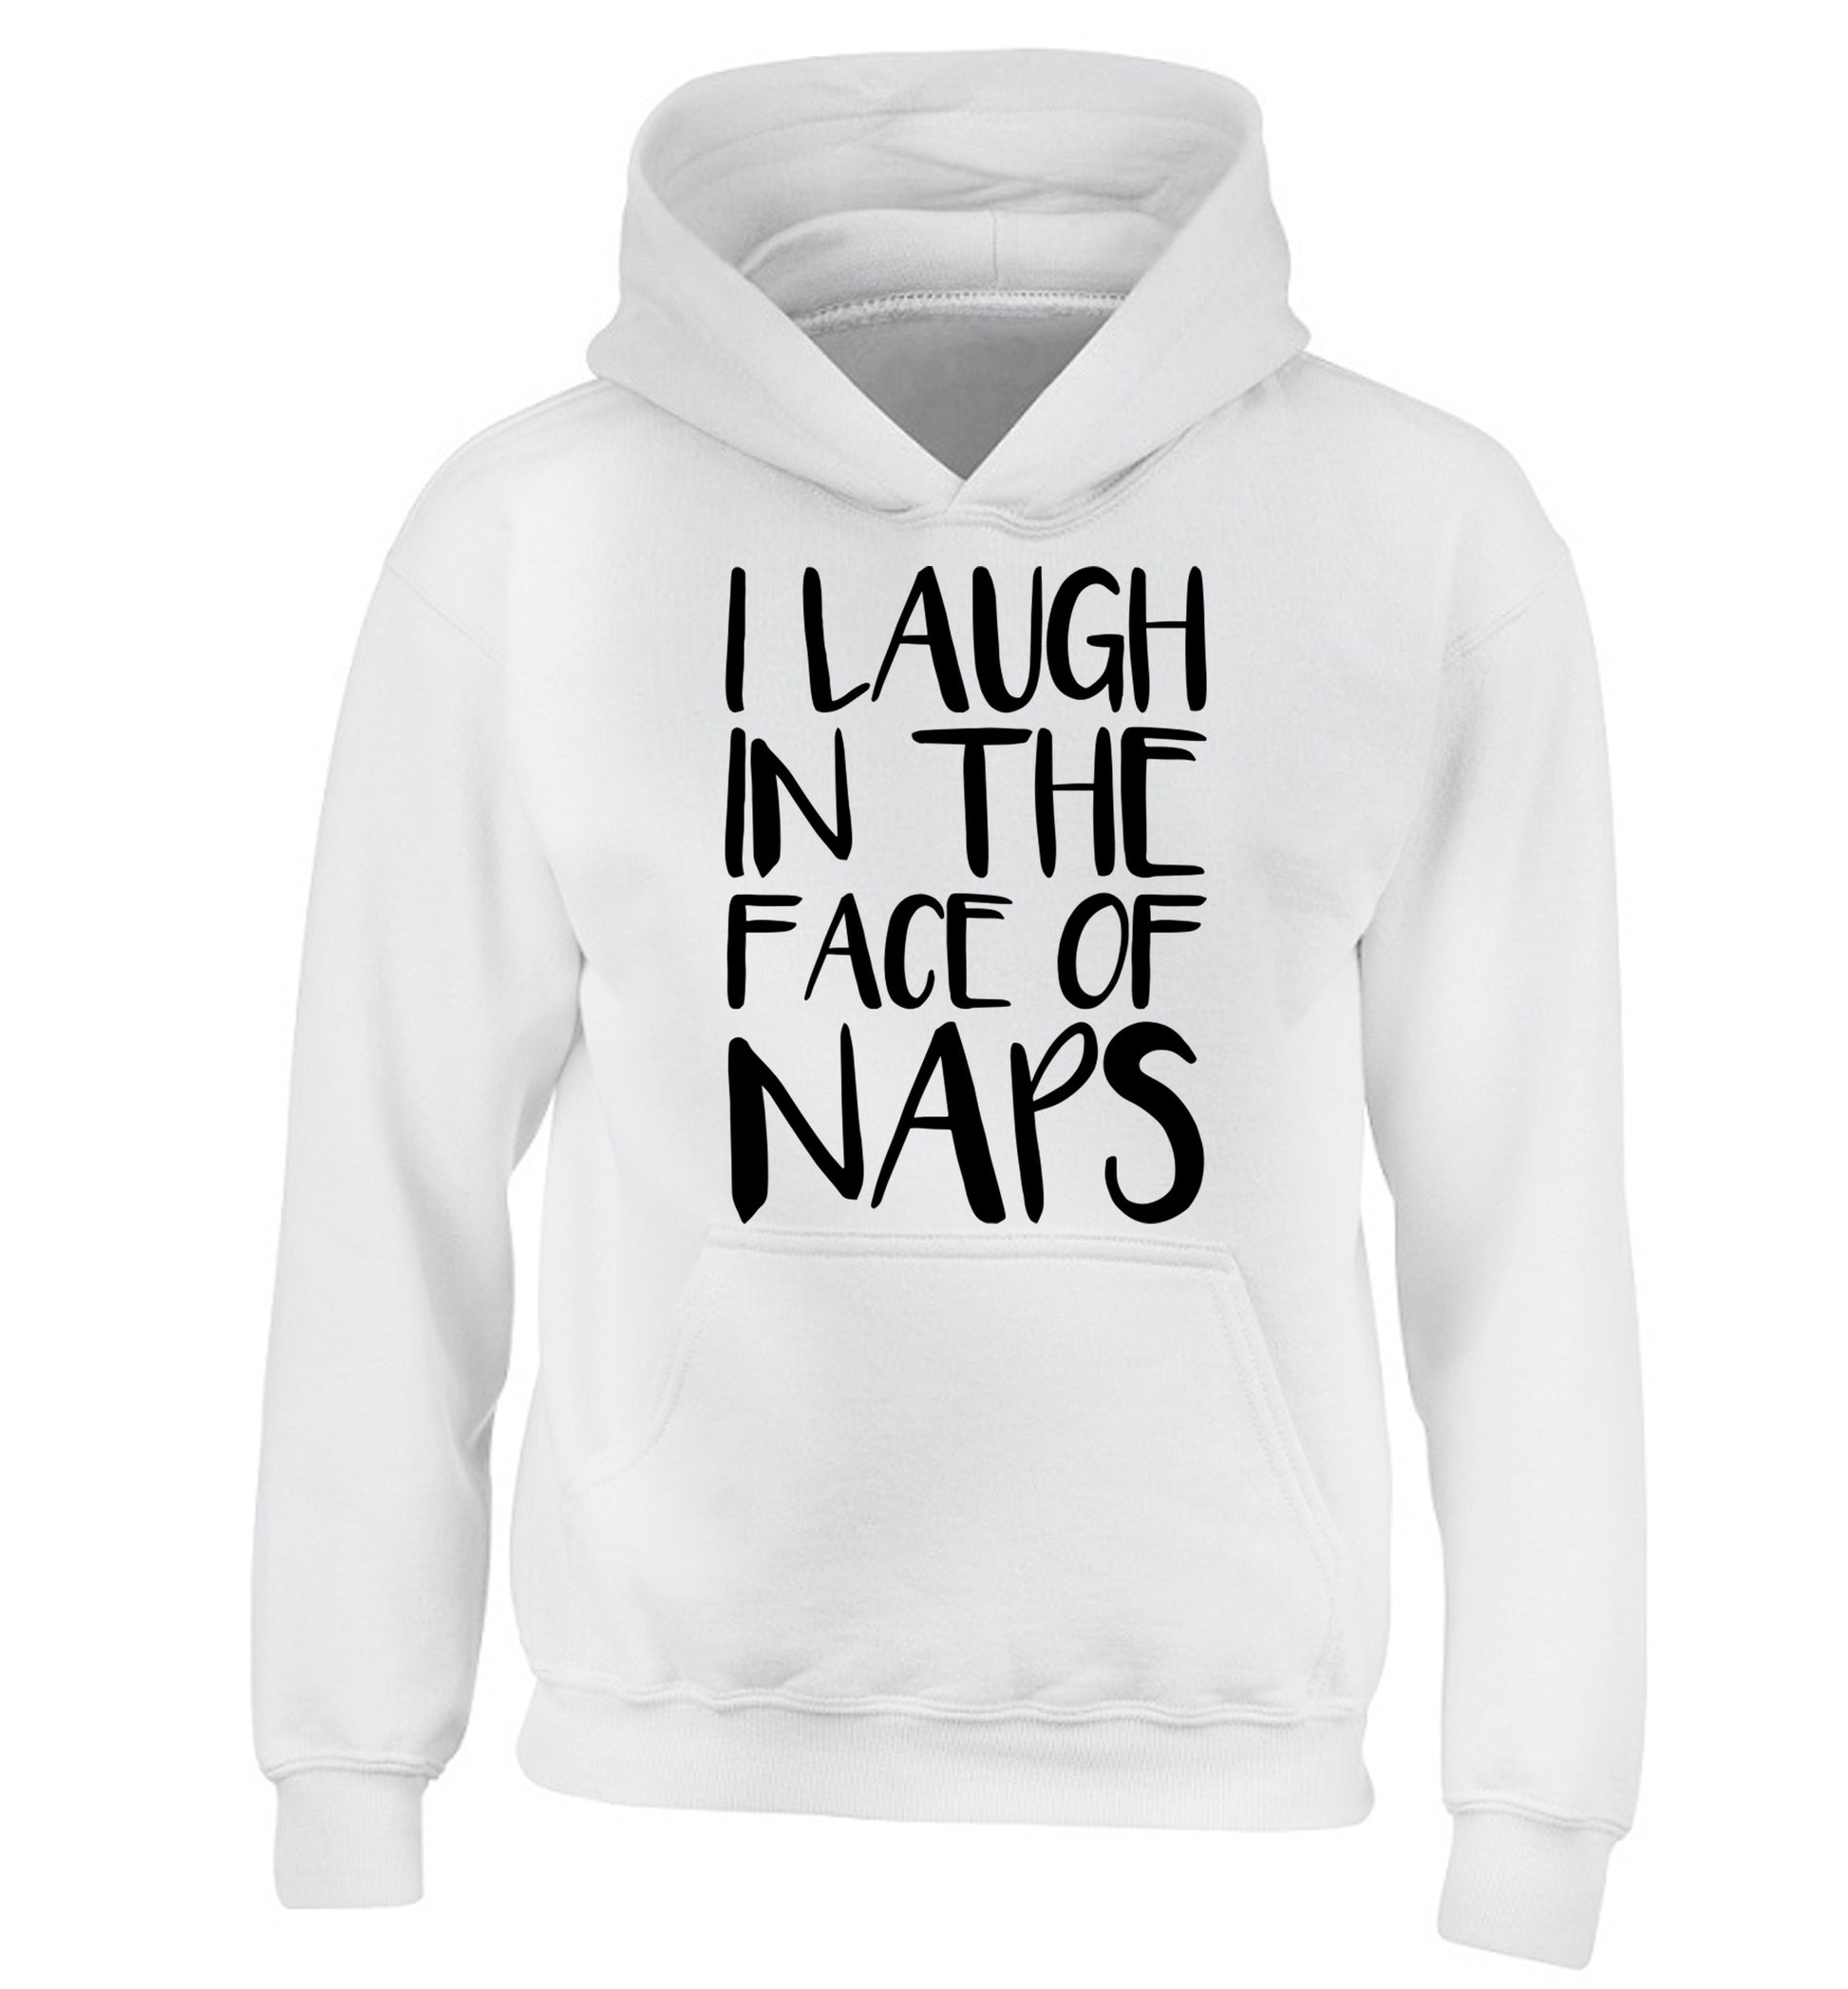 I laugh in the face of naps children's white hoodie 12-14 Years